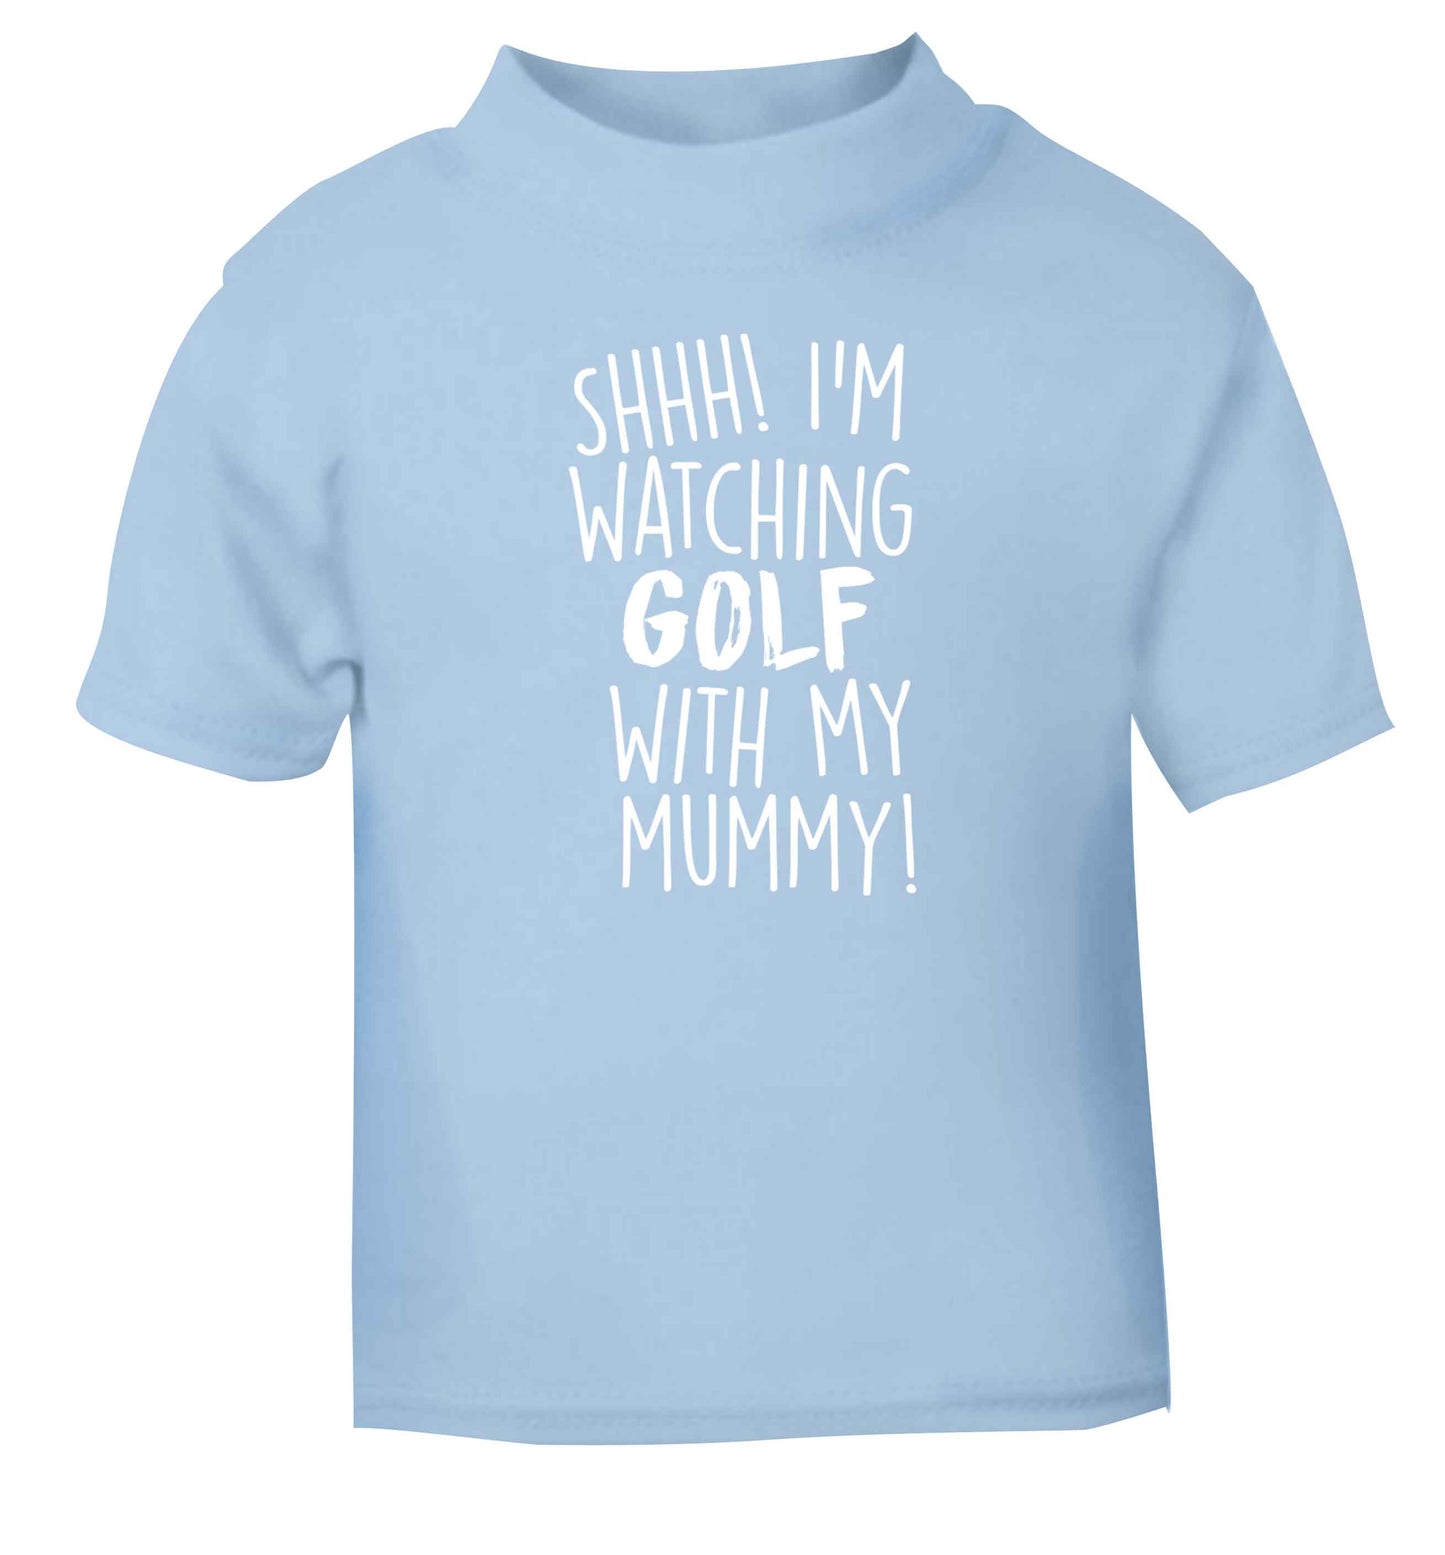 Shh I'm watching golf with my mummy light blue Baby Toddler Tshirt 2 Years